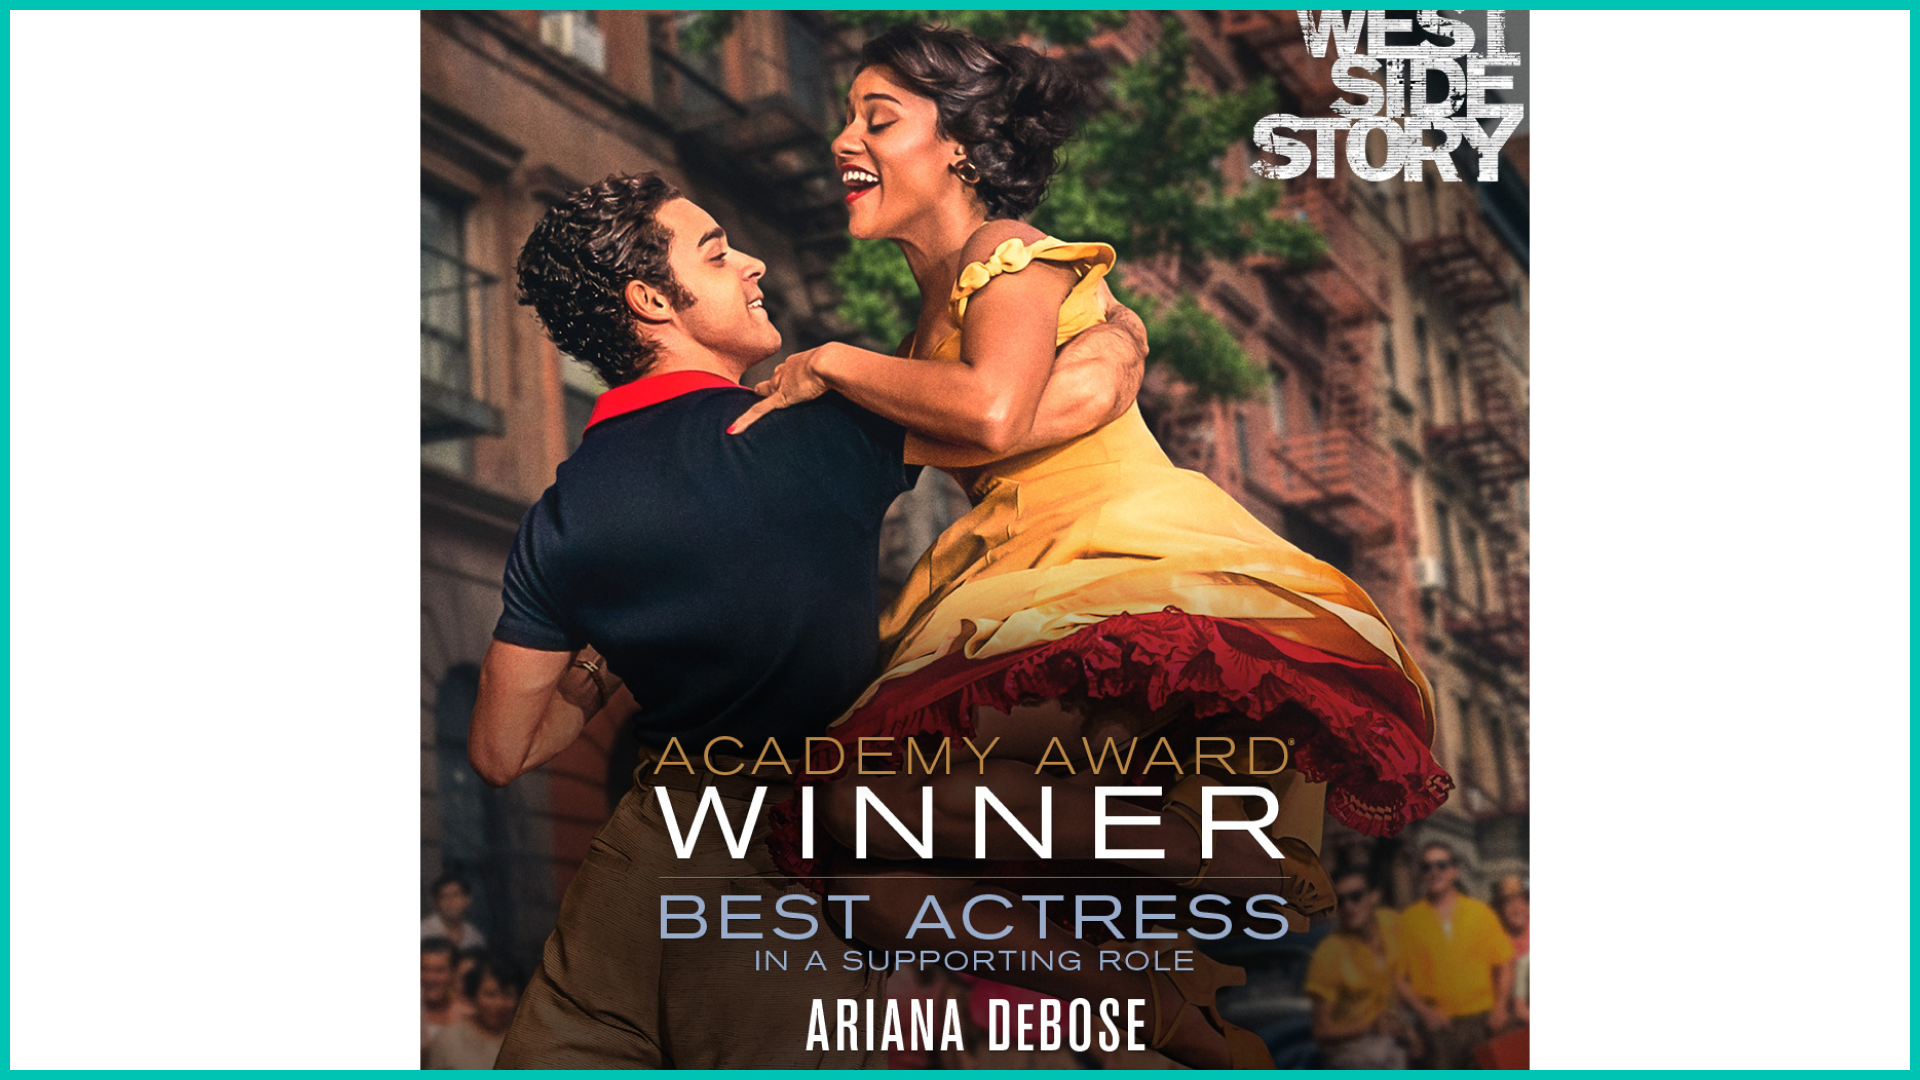 West side story movie poster with Ariana DeBose